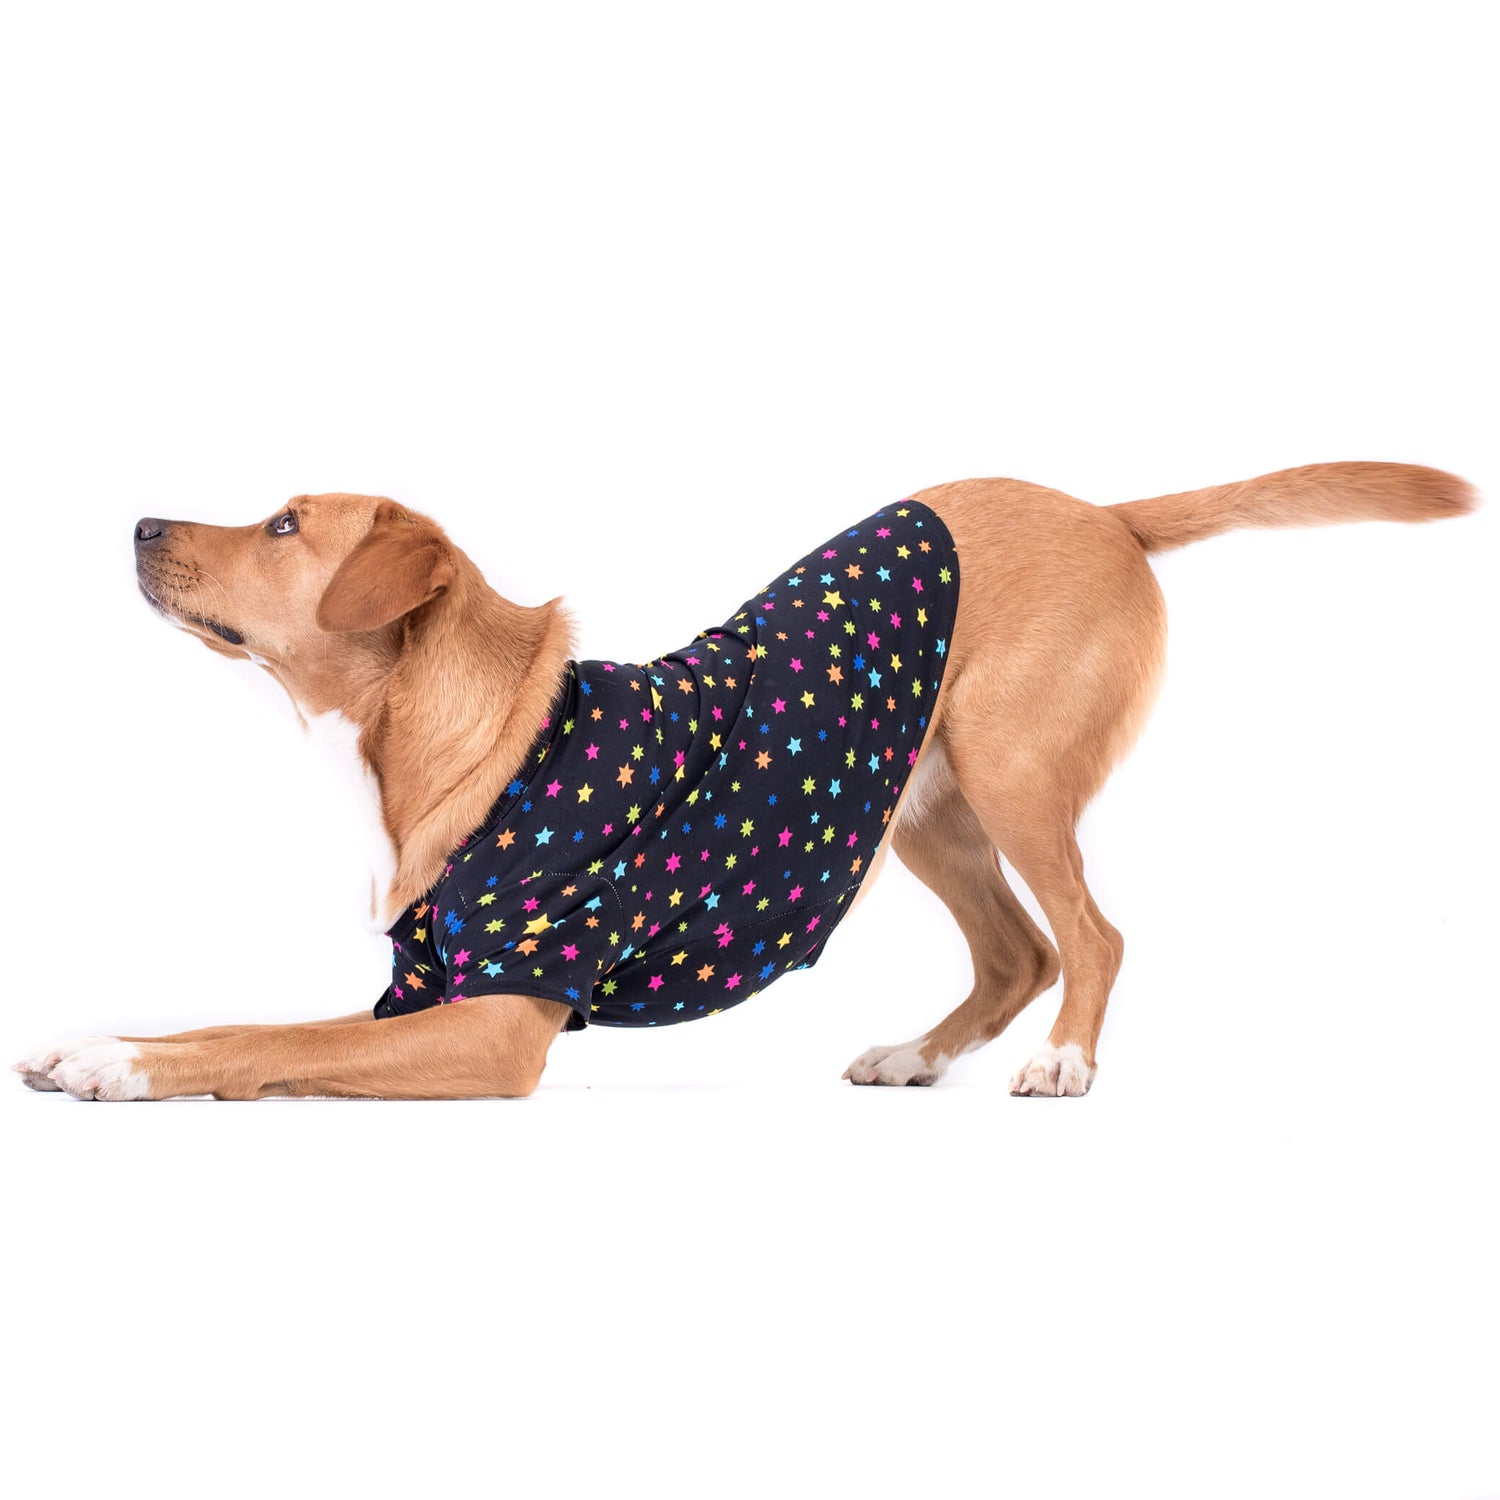 Labrador in star gazer dog shirt - Playful Labrador doing a downward dog pose in a black shirt with bright multi-colored stars - Combine style and flexibility with the star gazer shirt - Shop now for trendy dog shirts and clothing with eye-catching designs.